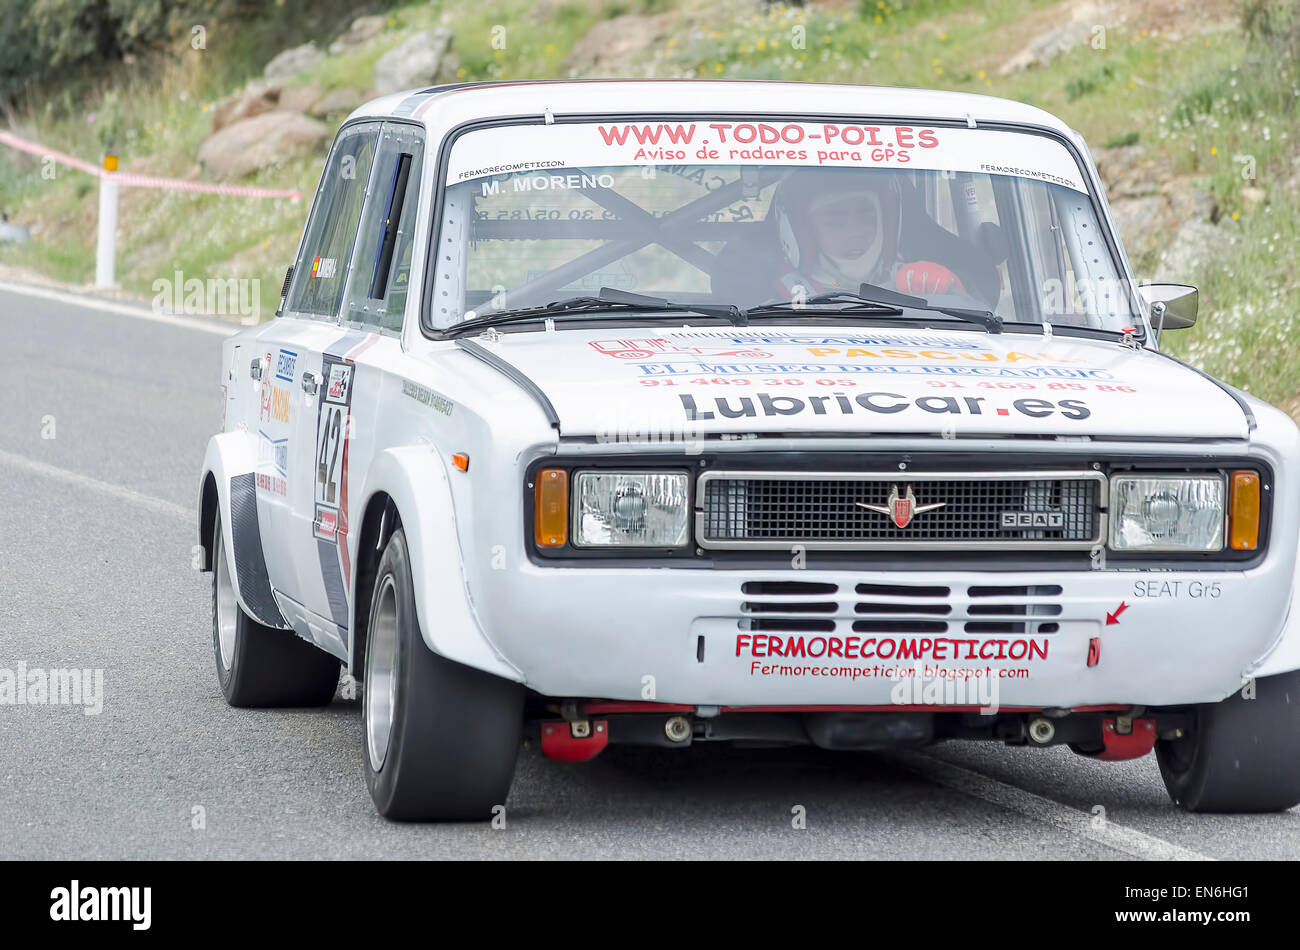 Madrid rally championship. Manuel Moreno is driving his -Seat 124-, during the ascent to -La Cabrera-. Stock Photo